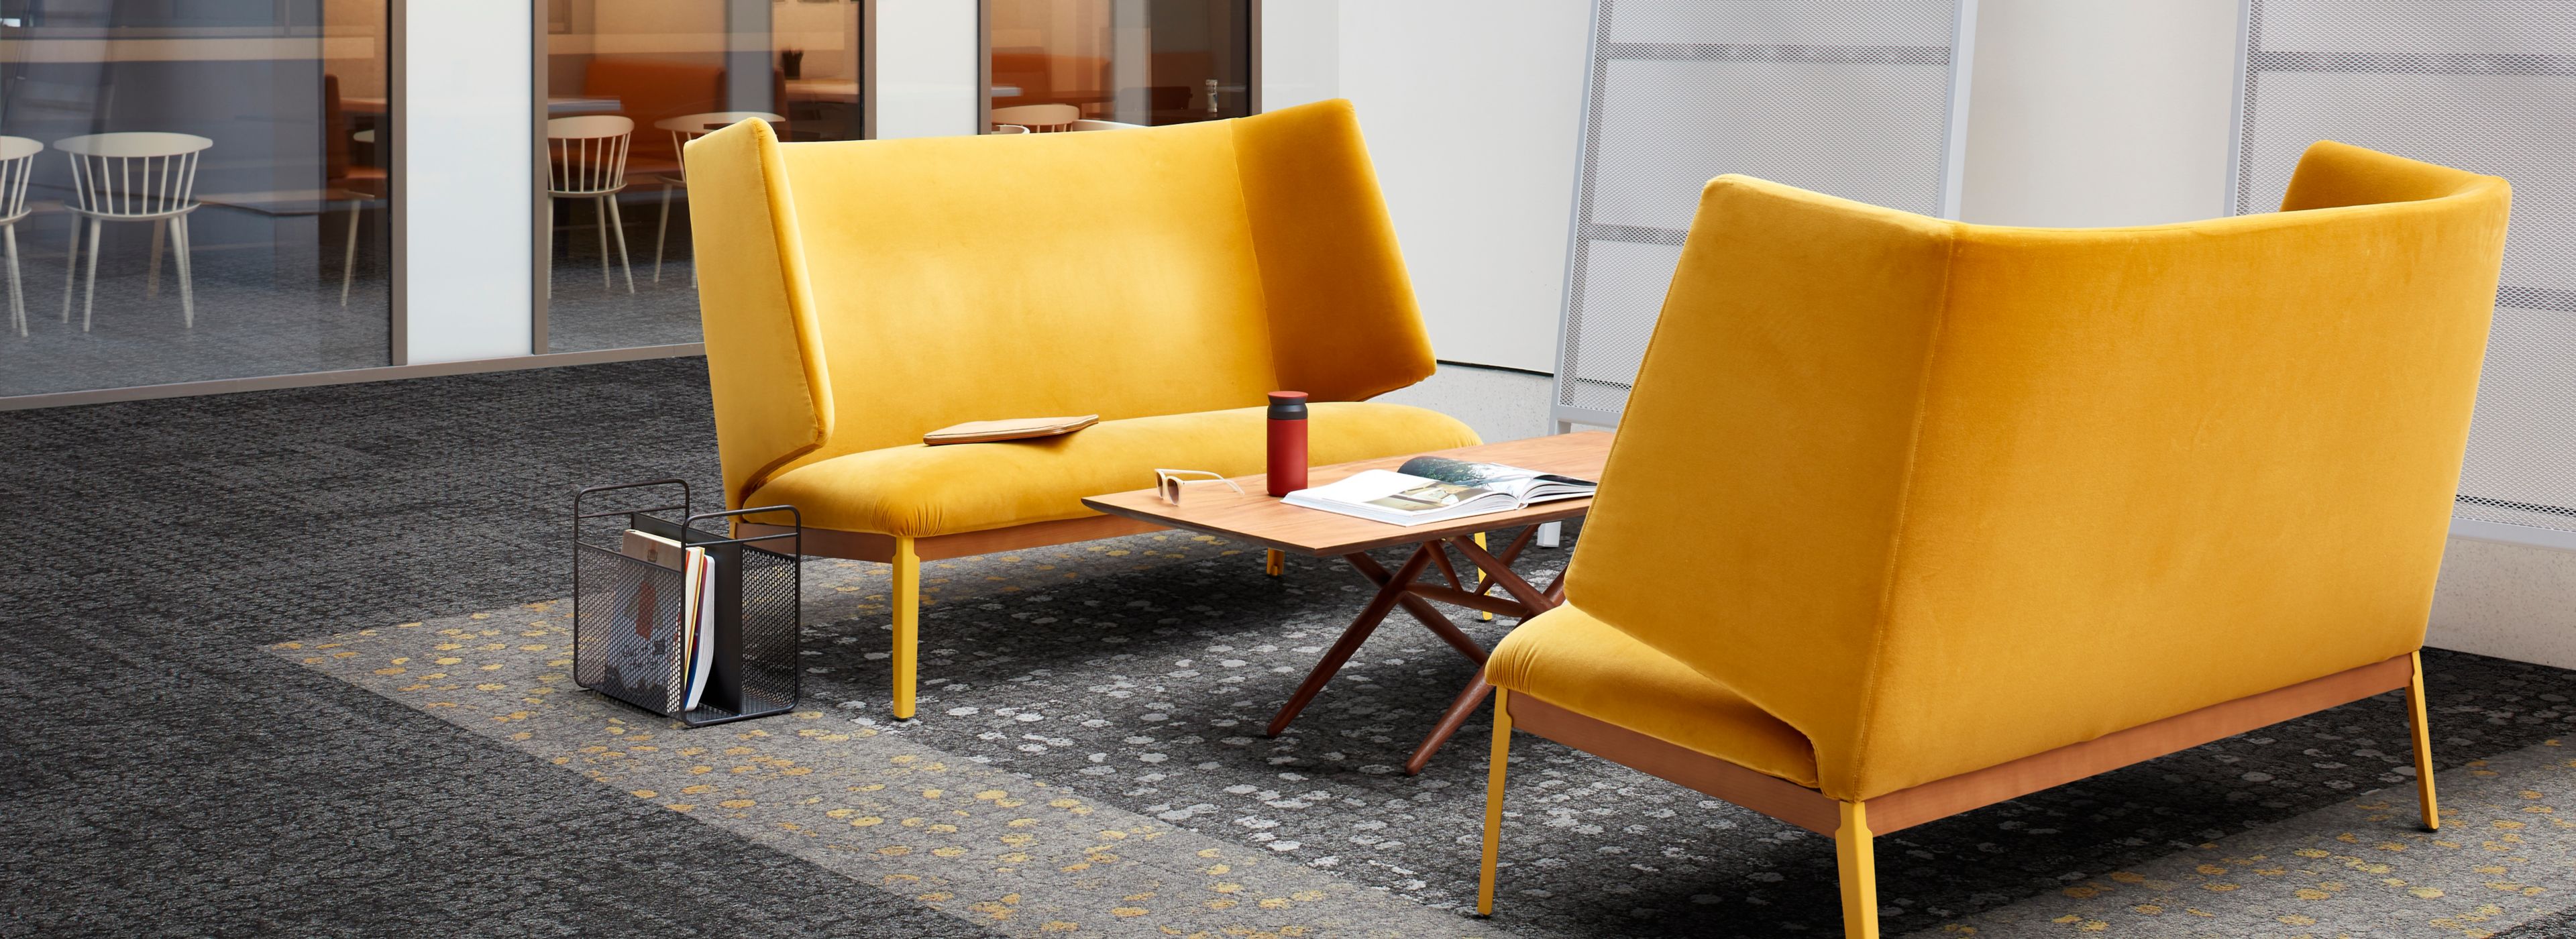 Interface Mercer Street and Broome Street carpet tile in seating area with two yellow couches imagen número 1